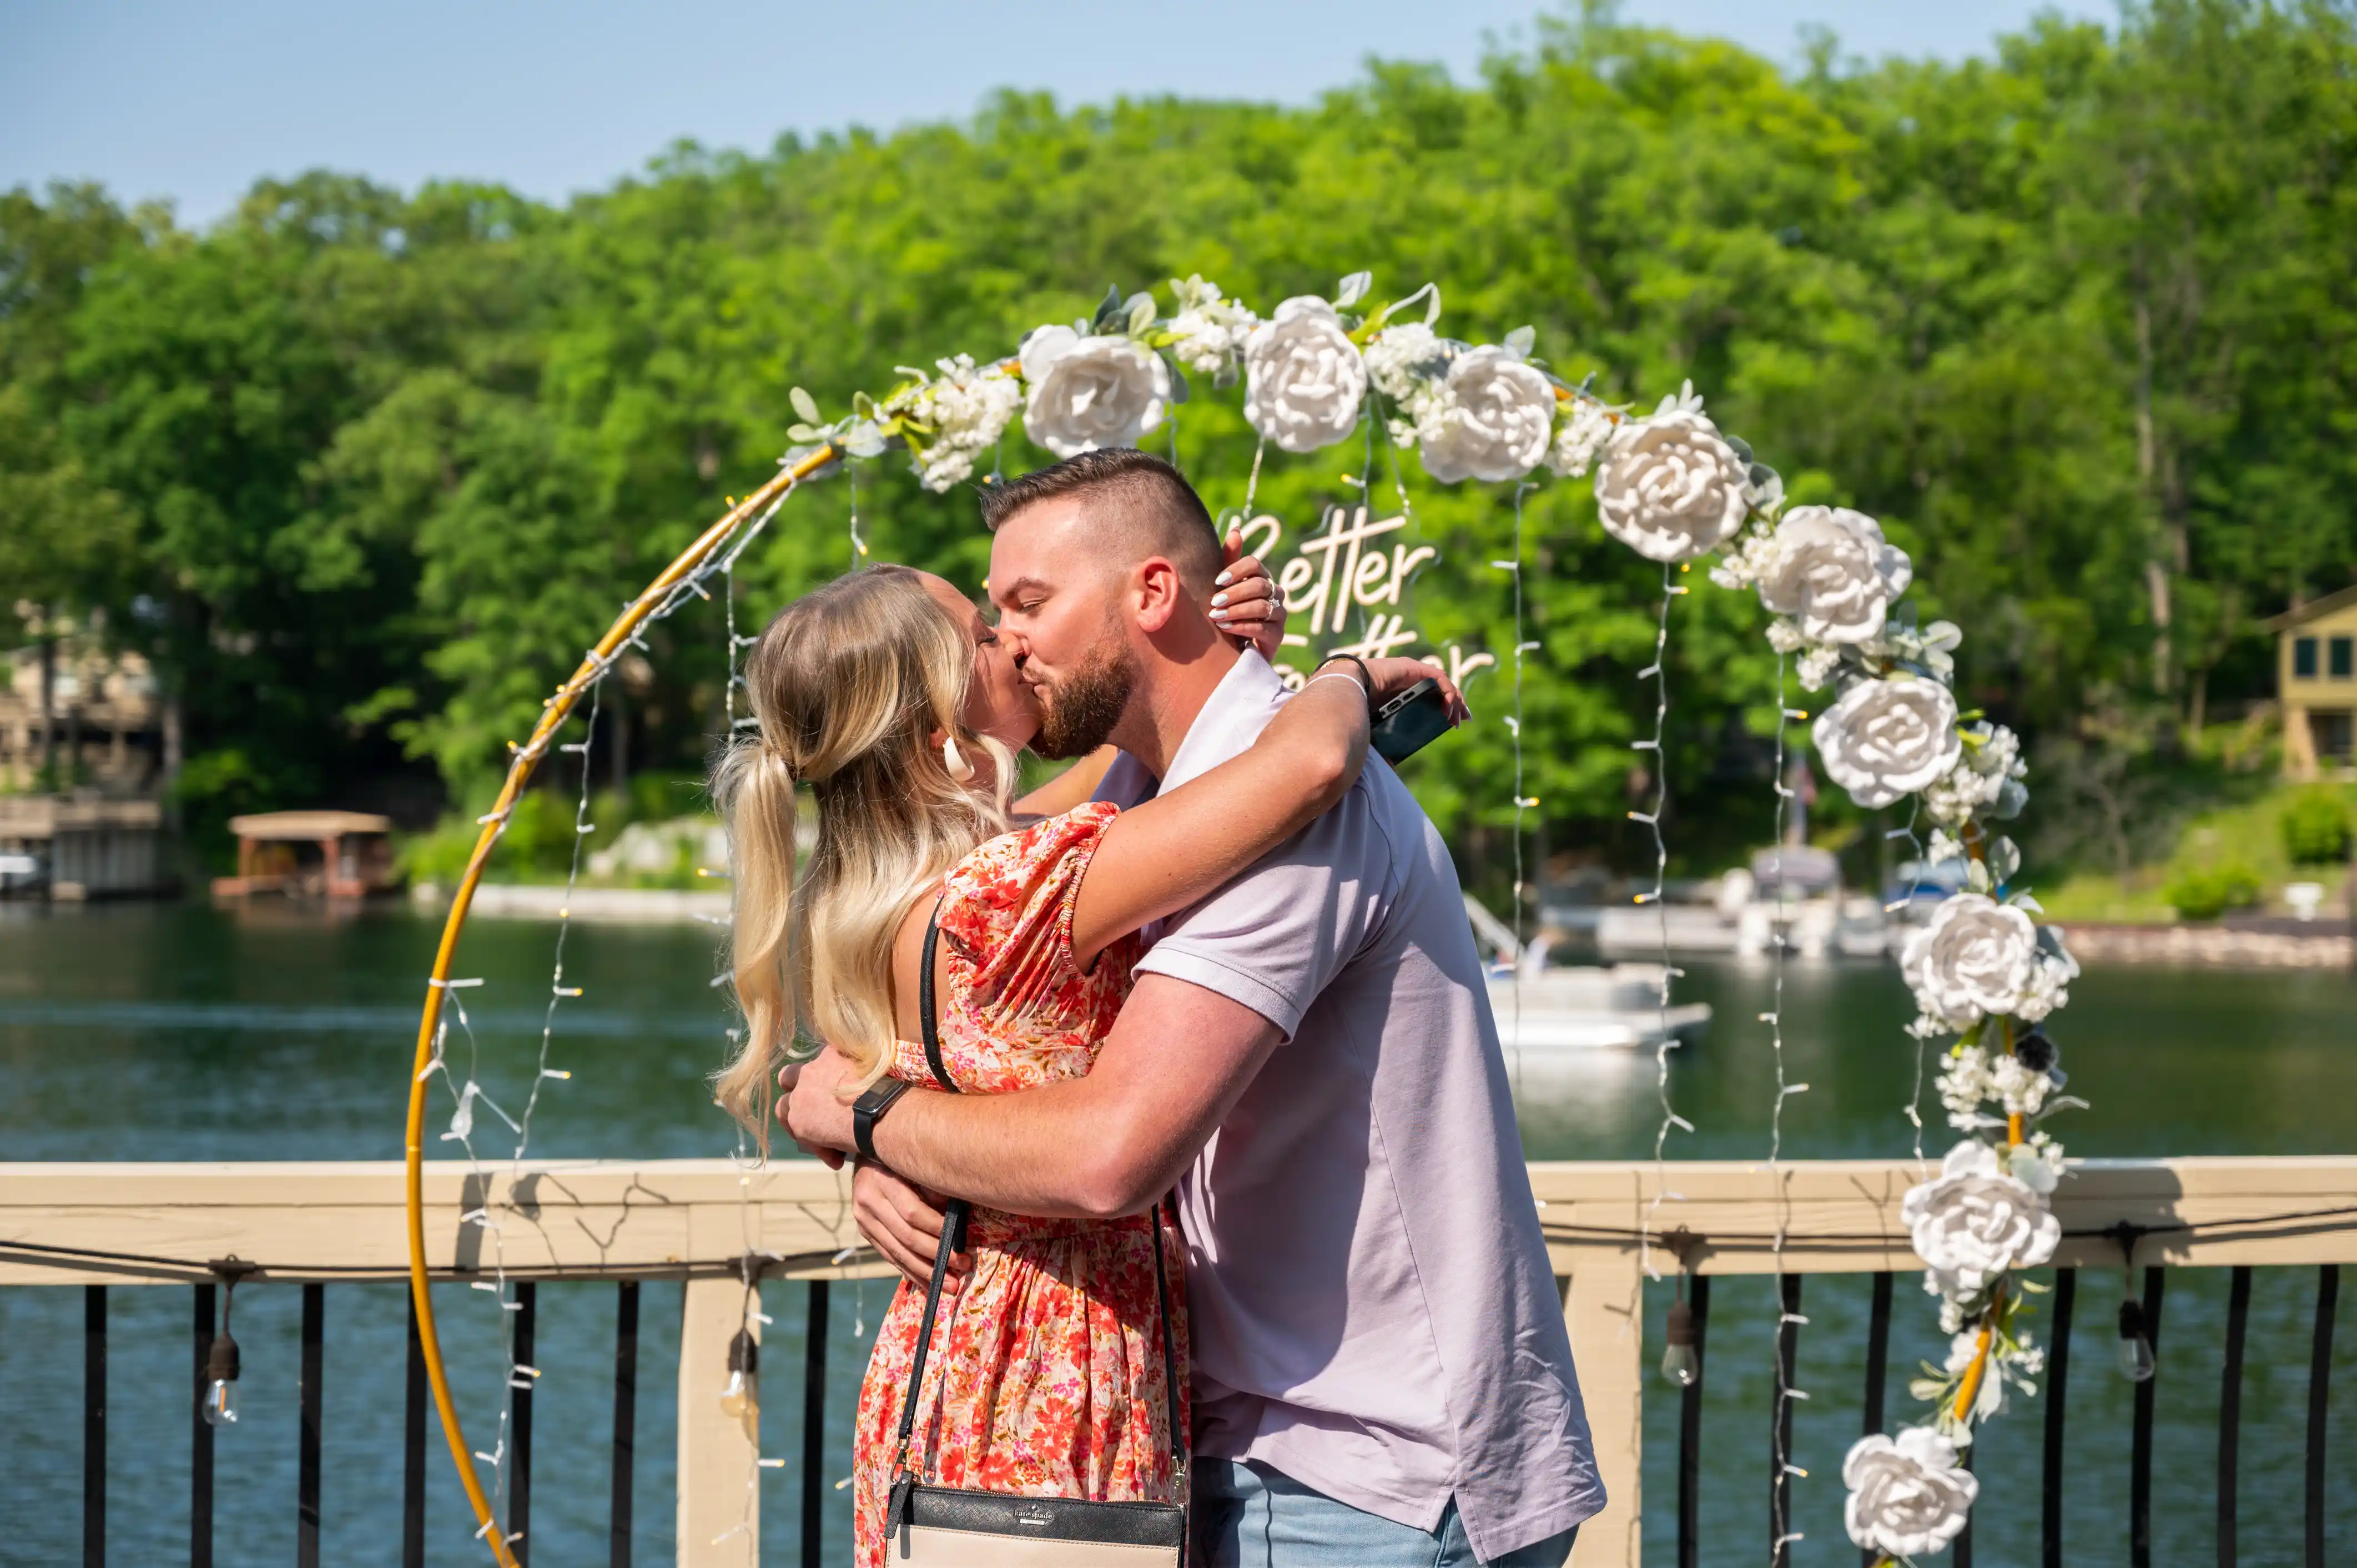 Couple embracing and kissing under a floral arch on a bridge with a lake and boats in the background